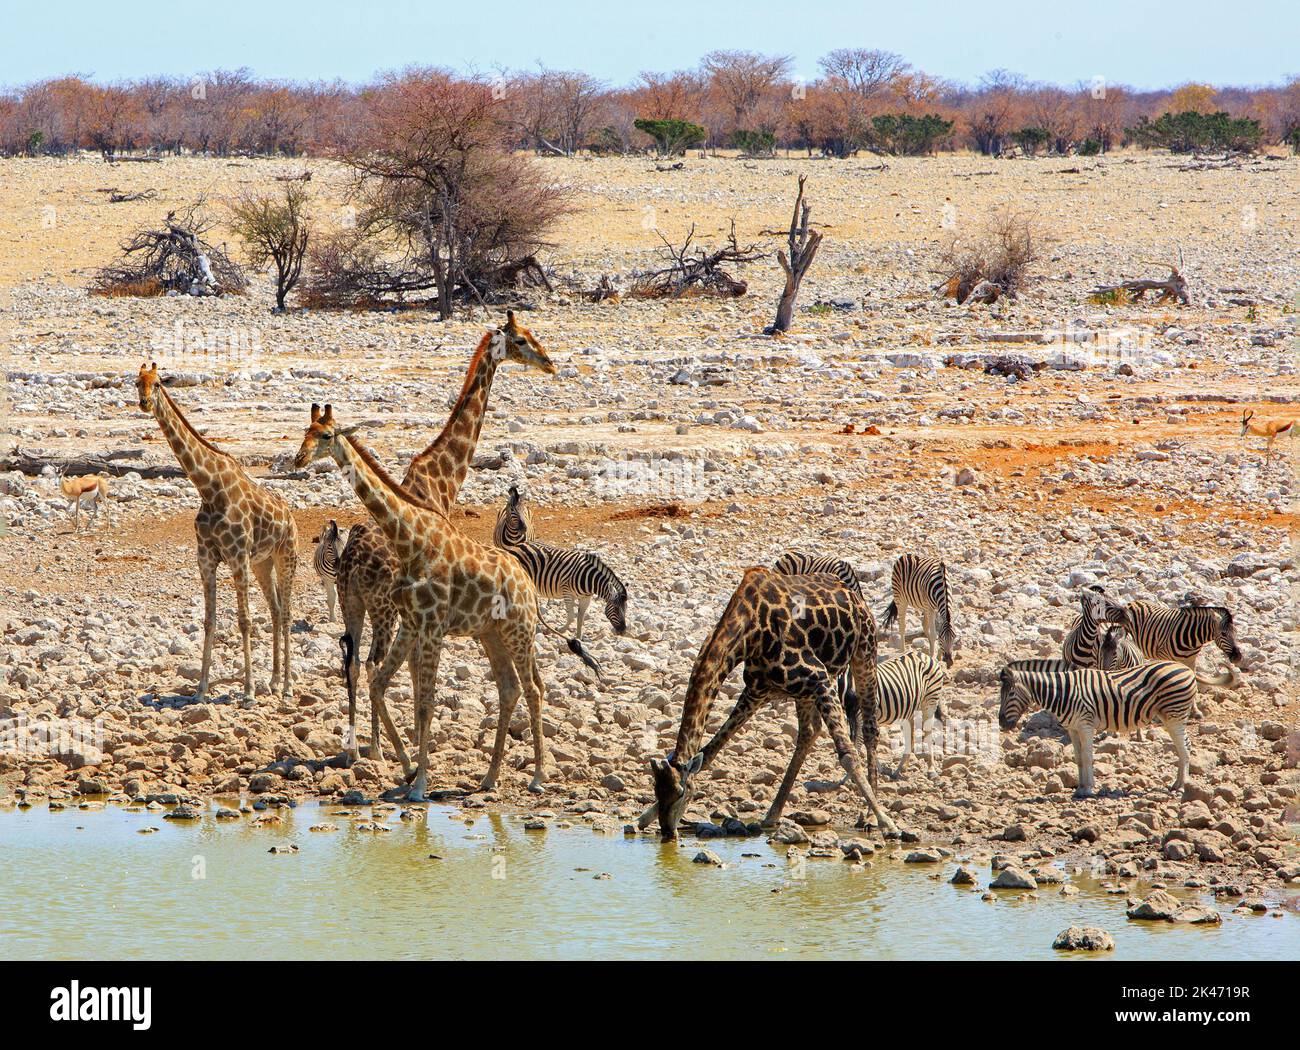 A wildlife lovers dream, a waterhole full of animals drinking.  An amazing sight to behold. Stock Photo